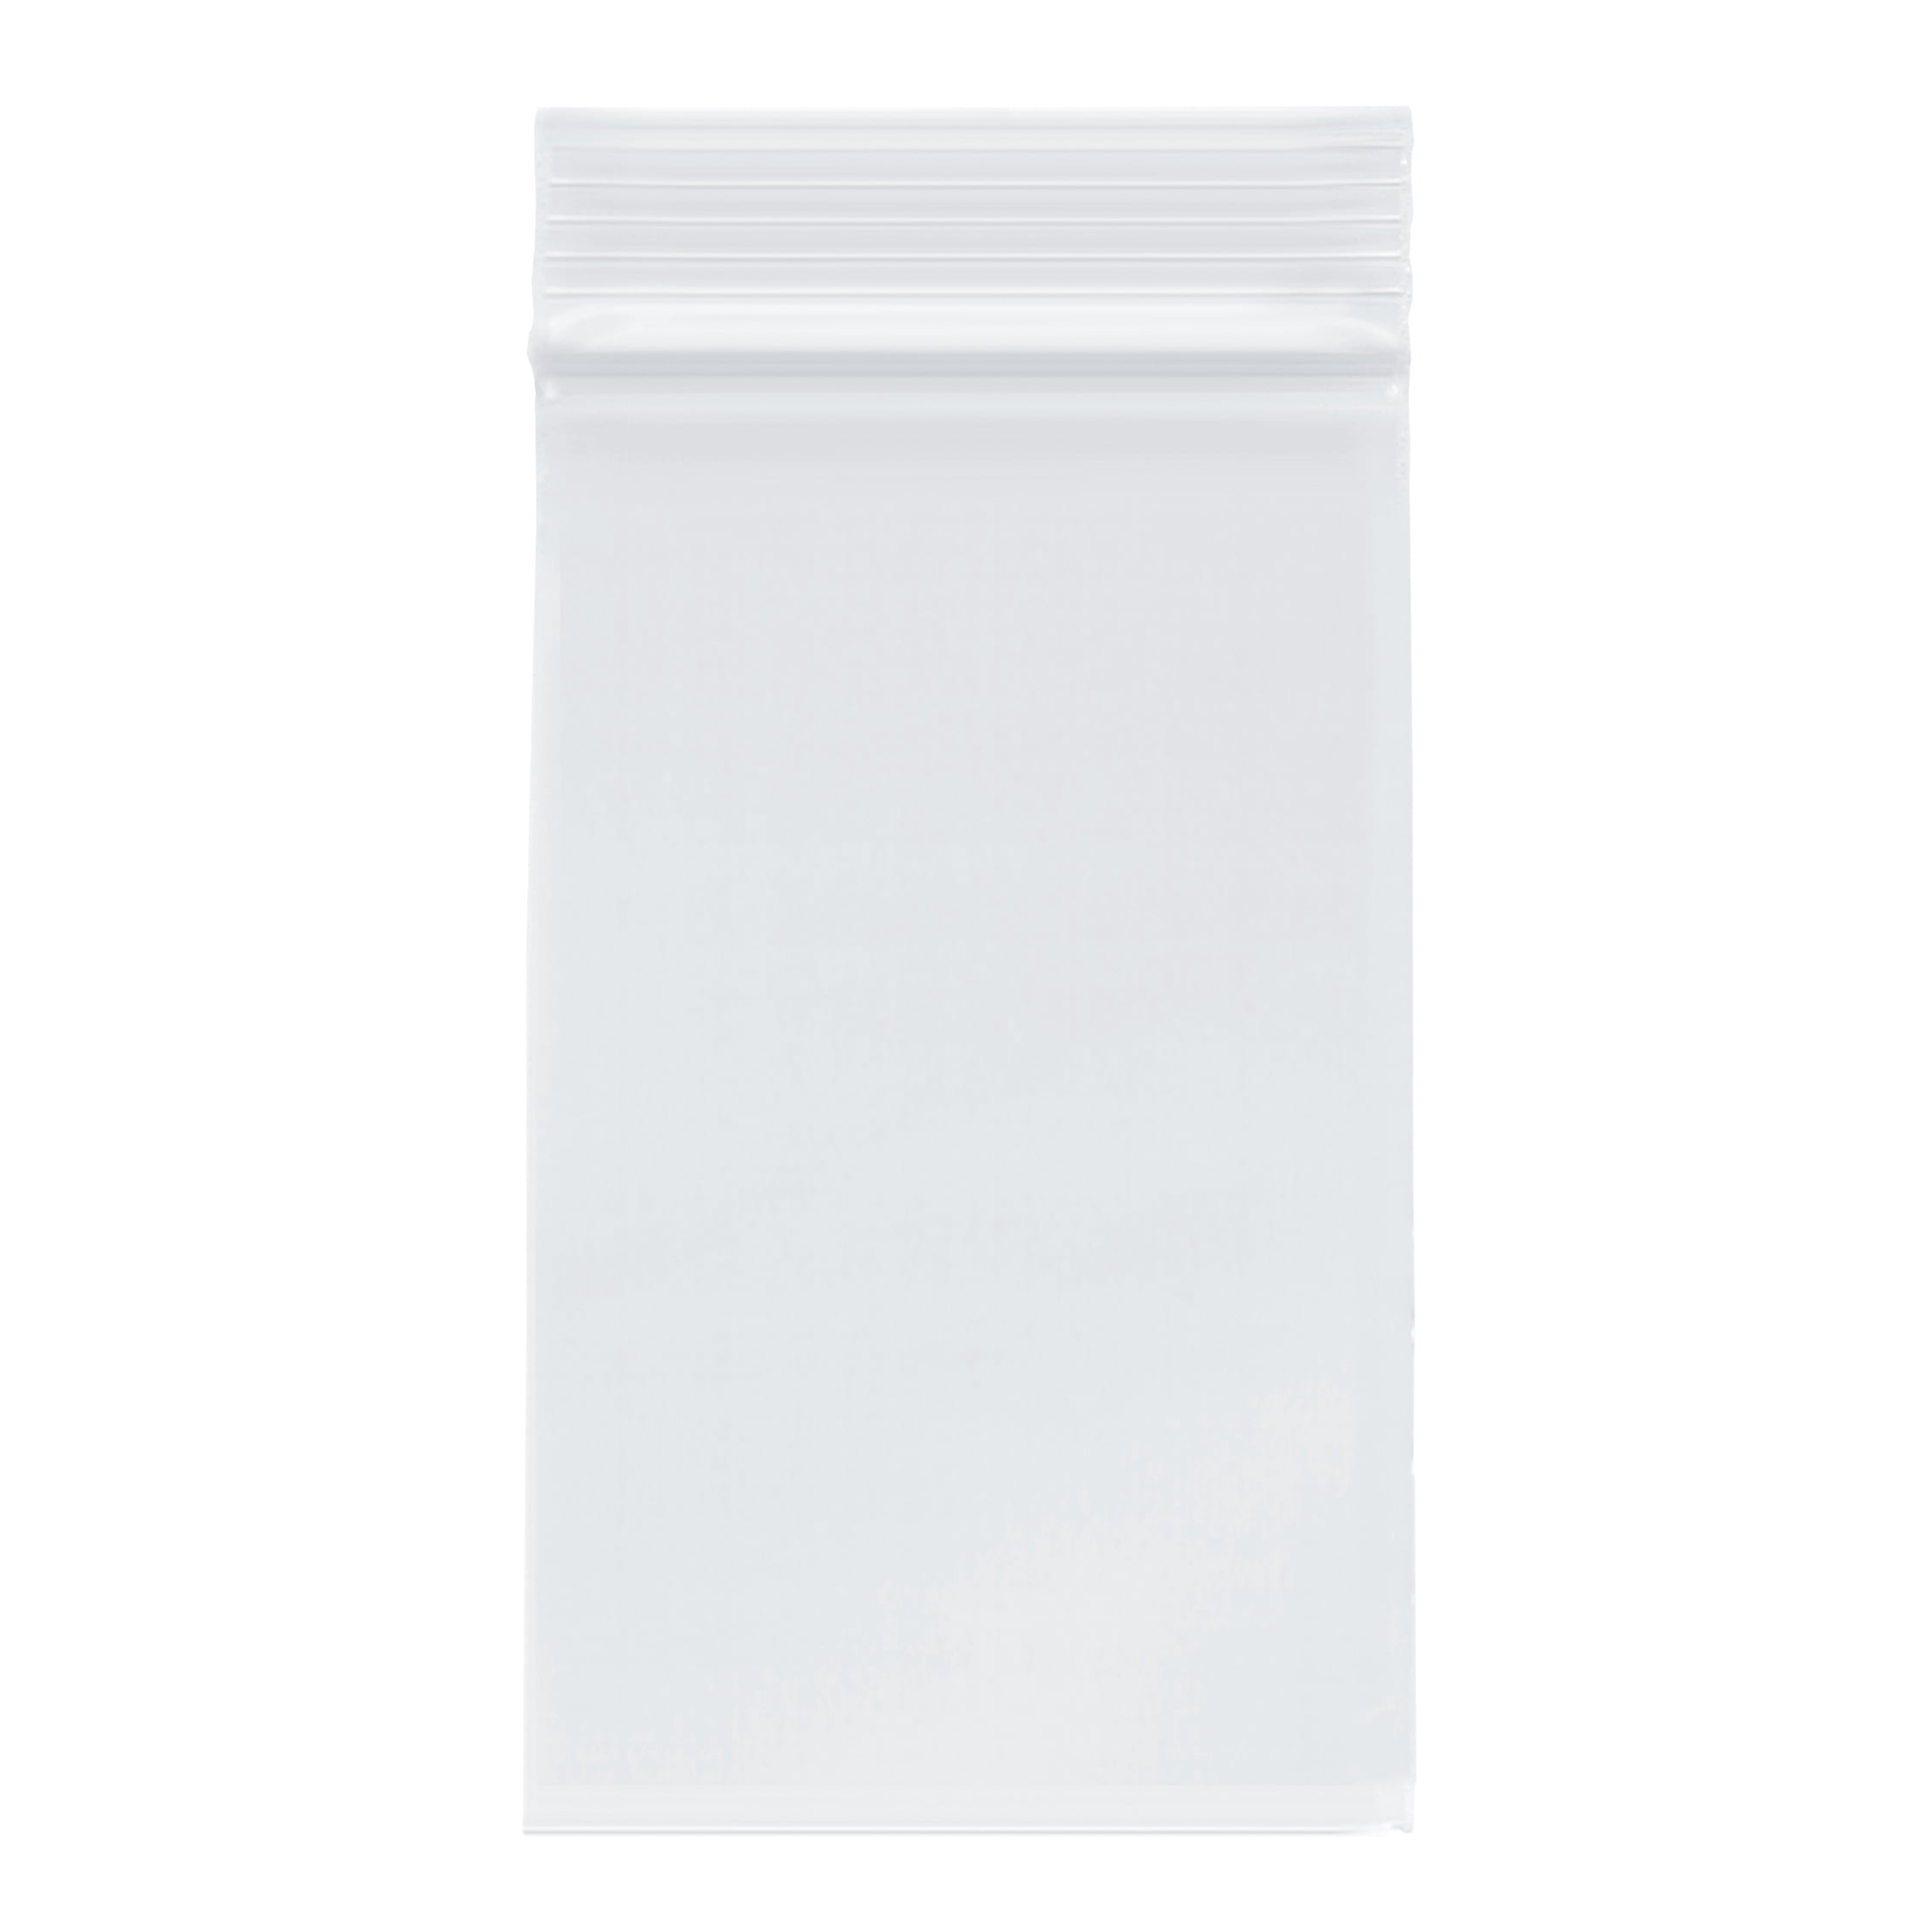 Clear Reclosable Bag with White Block 4 Mil 9" x 12" Zip Lock Bags 100 Pieces 